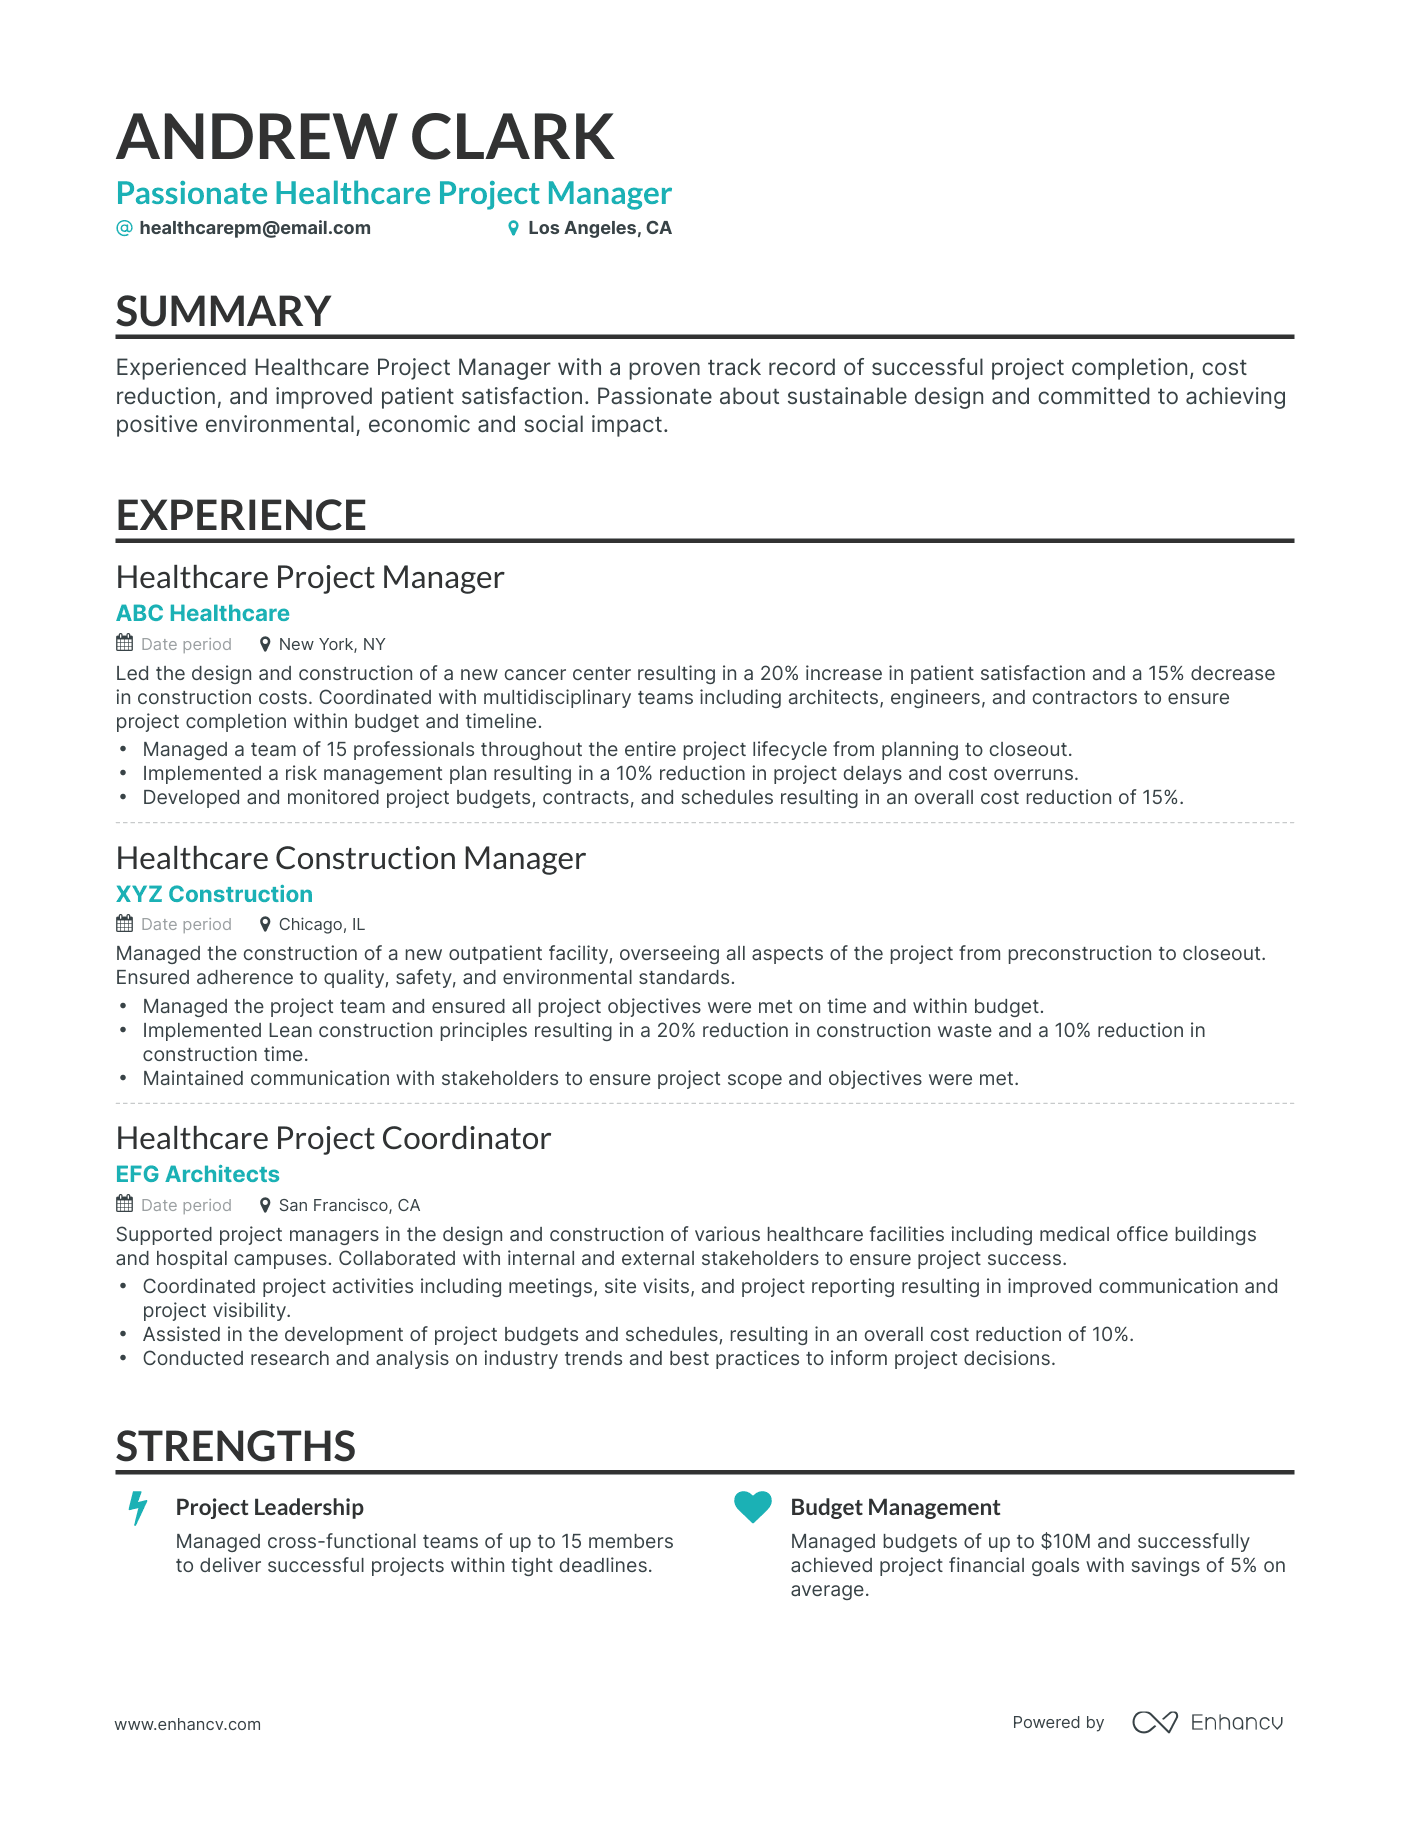 Classic Healthcare Project Manager Resume Template